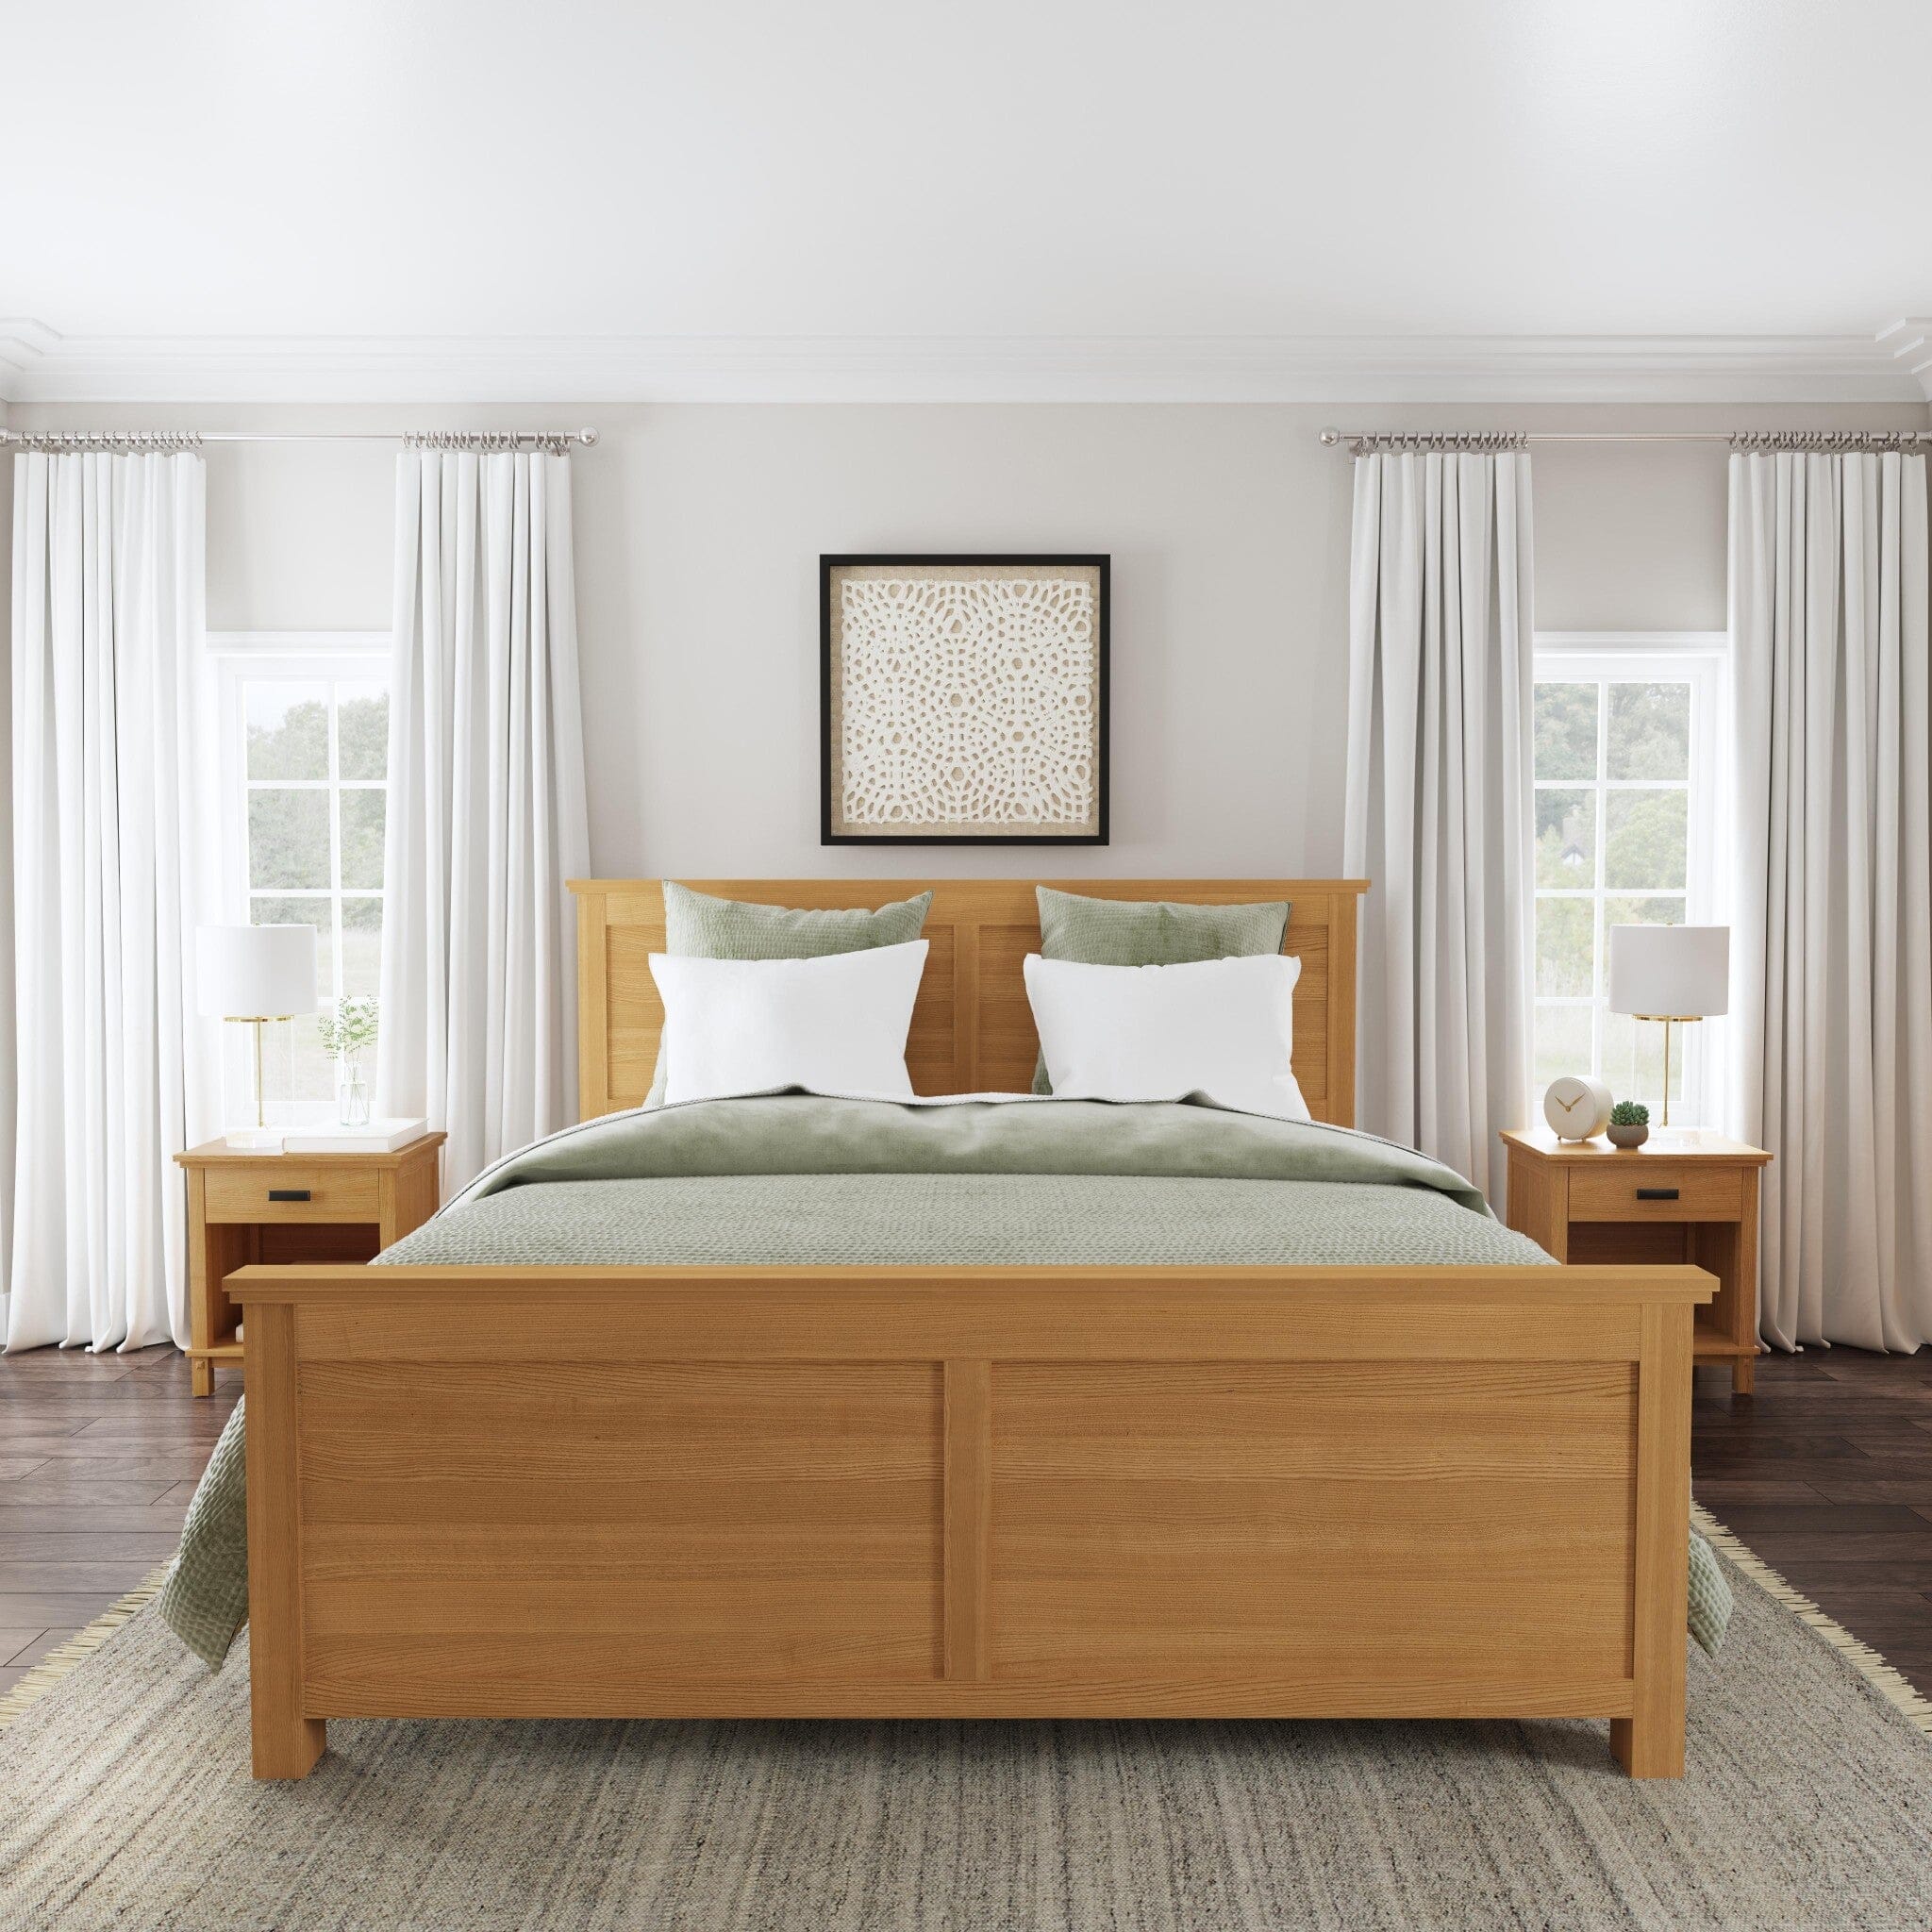 Traditional King Bed and Two Nightstands By Oak Park King Bed Set Oak Park